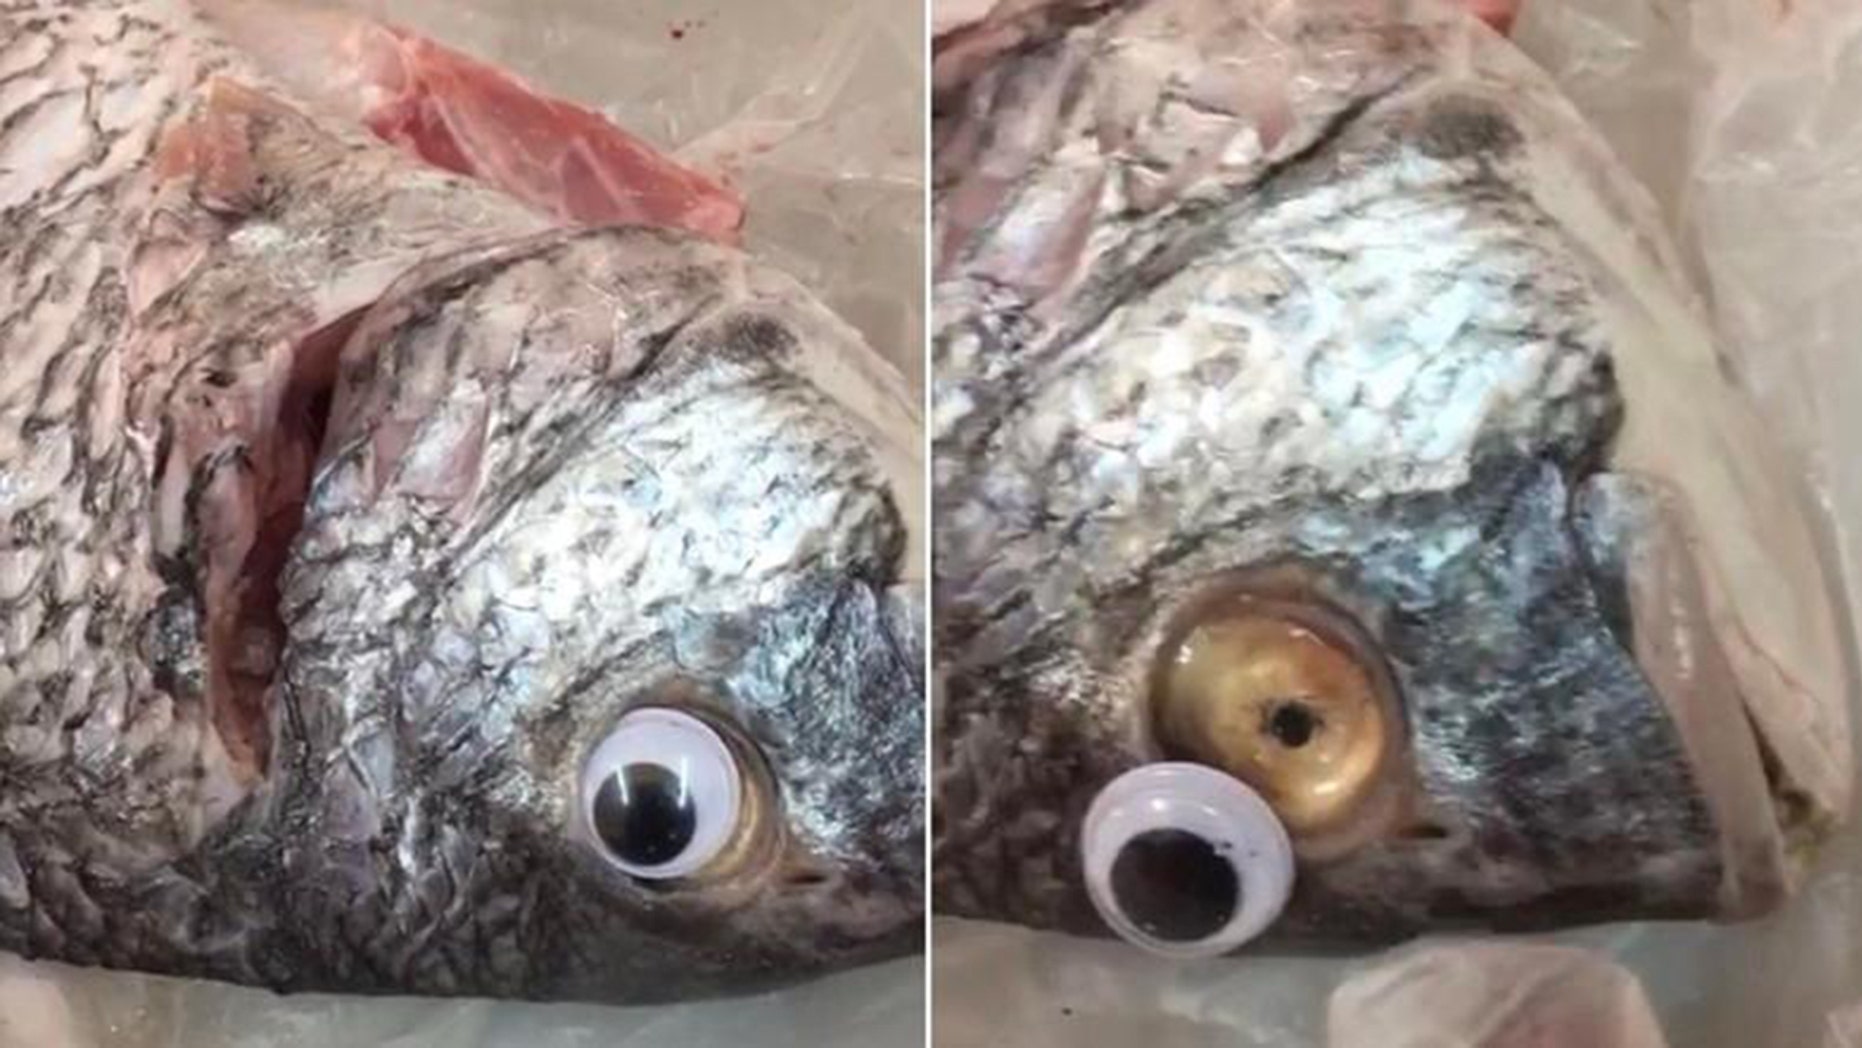 A woman reportedly discovered the deceitful practice while washing the fish.